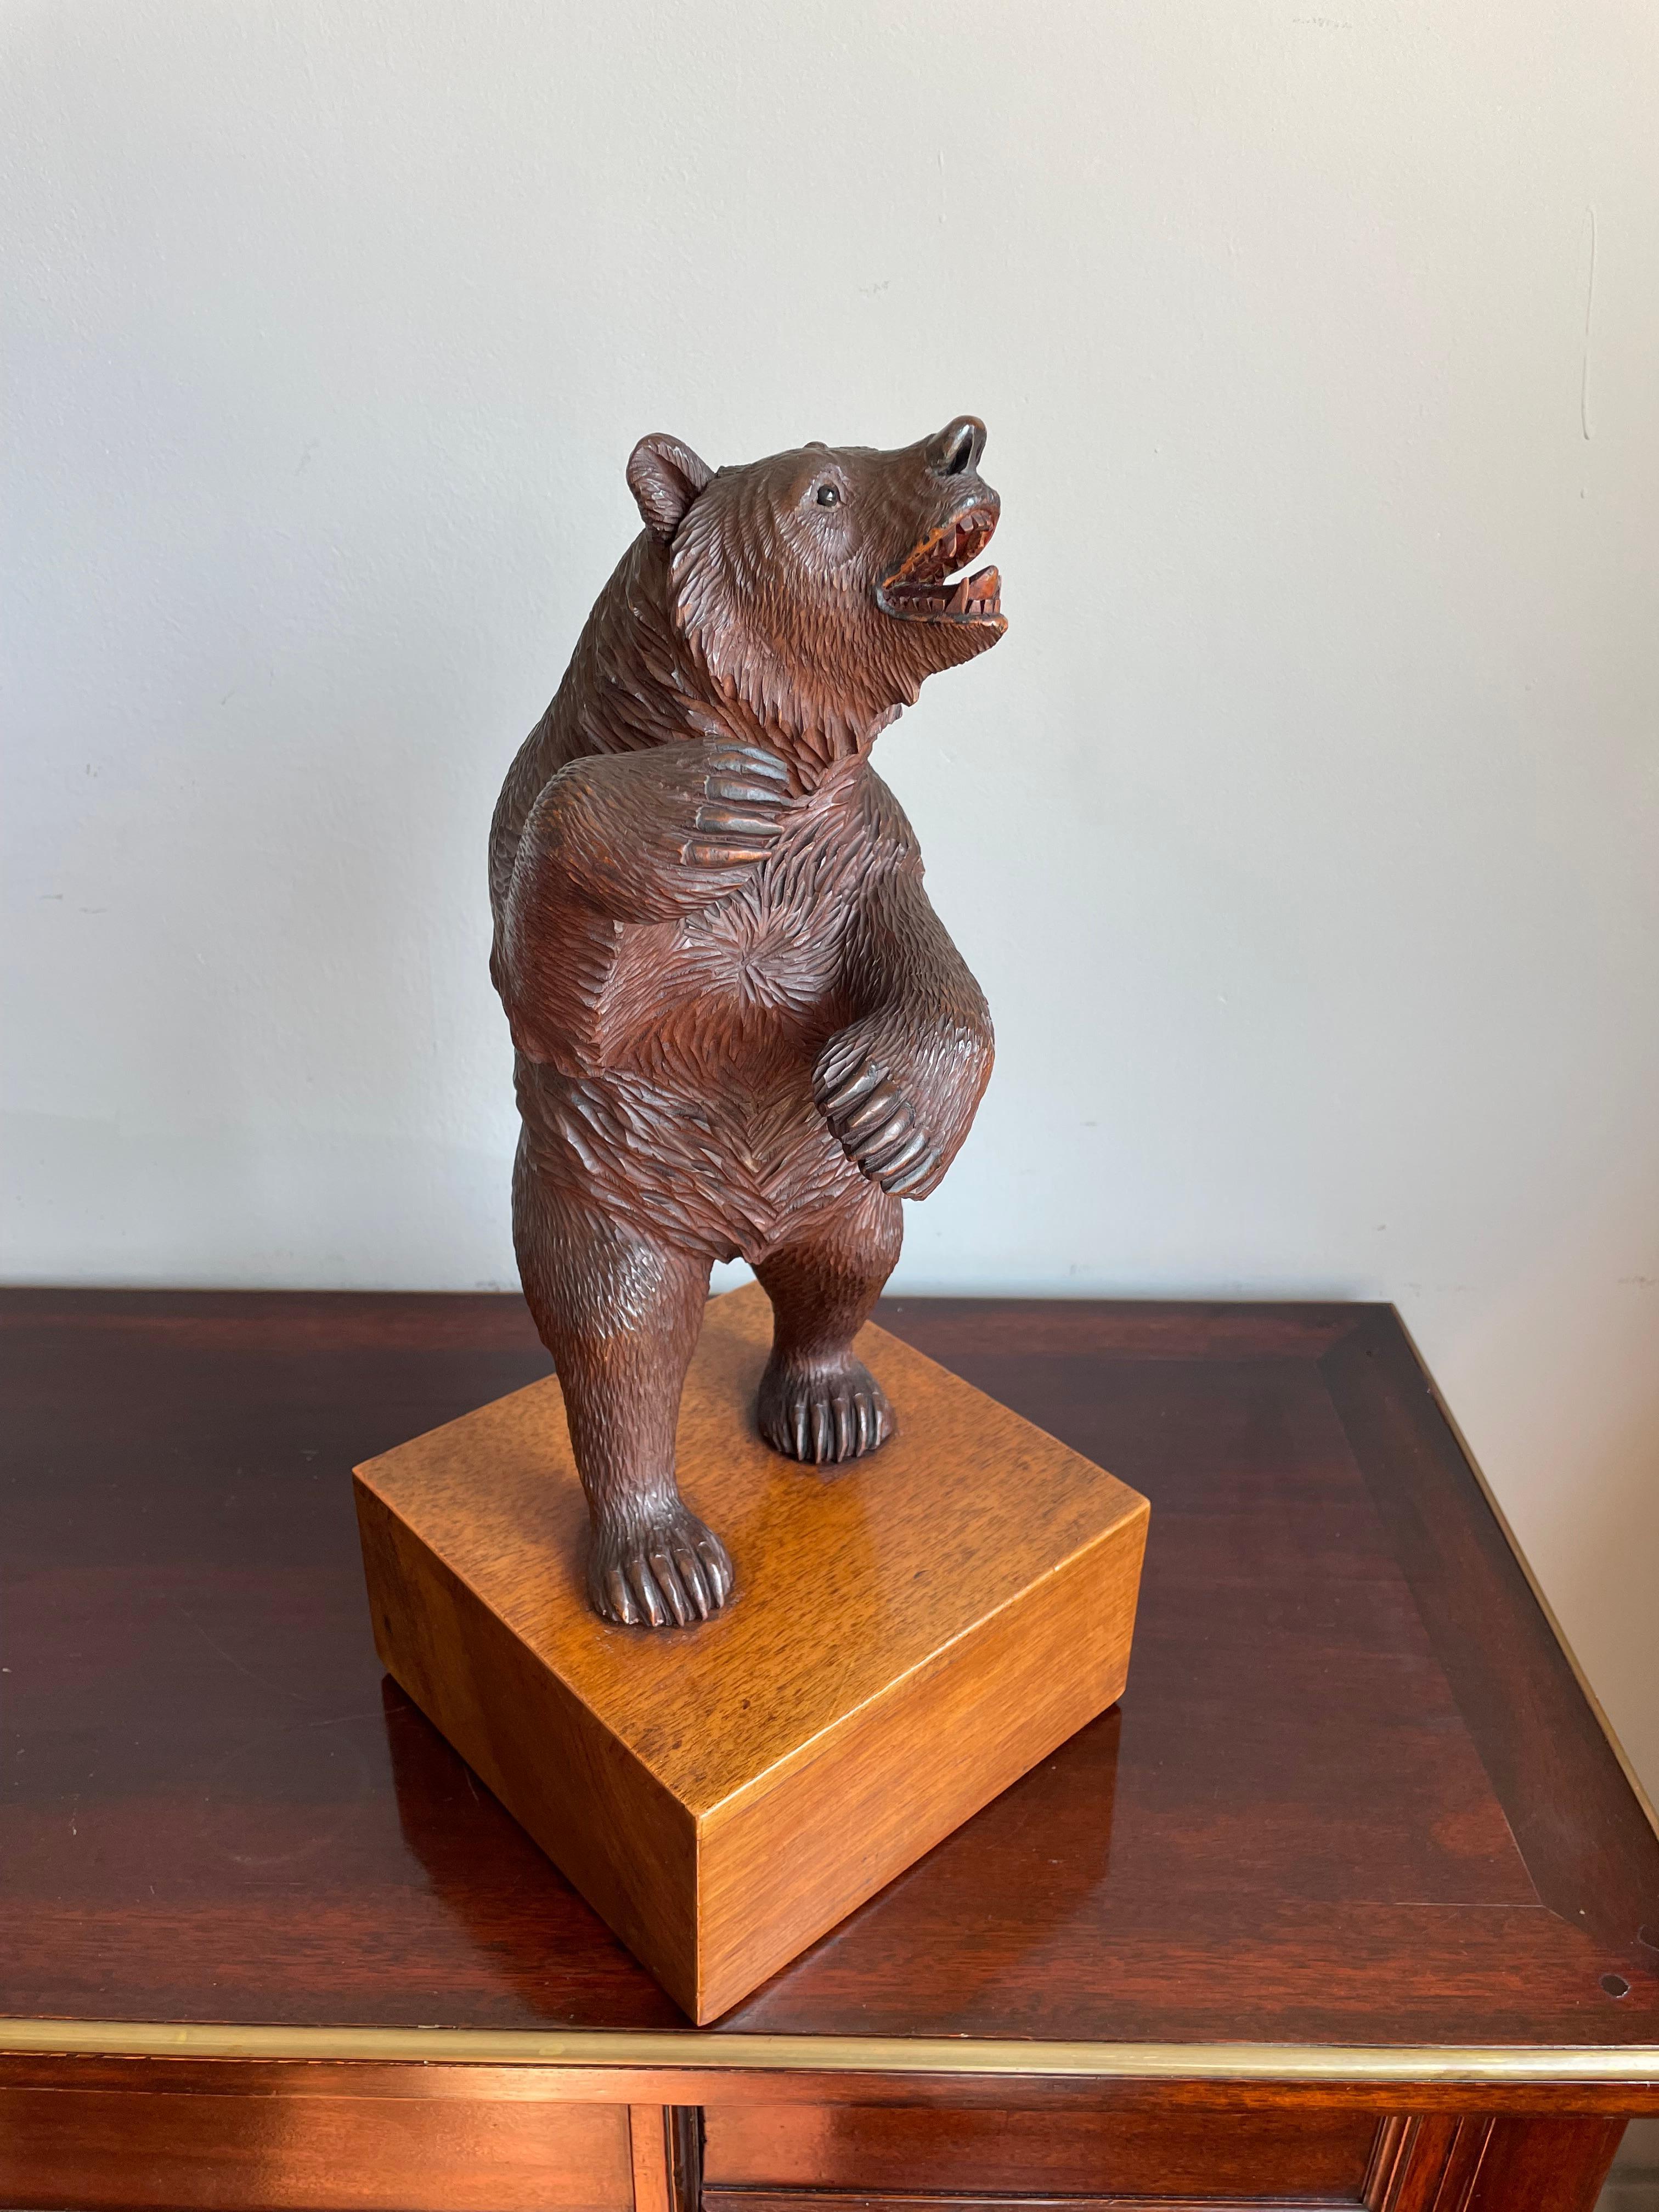 Incredible workmanship, antique bear sculpture on a nutwood base.

Most people on earth don't have a very good idea of who they are, nor what they really like and want. That often is also reflected in their interiors. Especially when it comes to